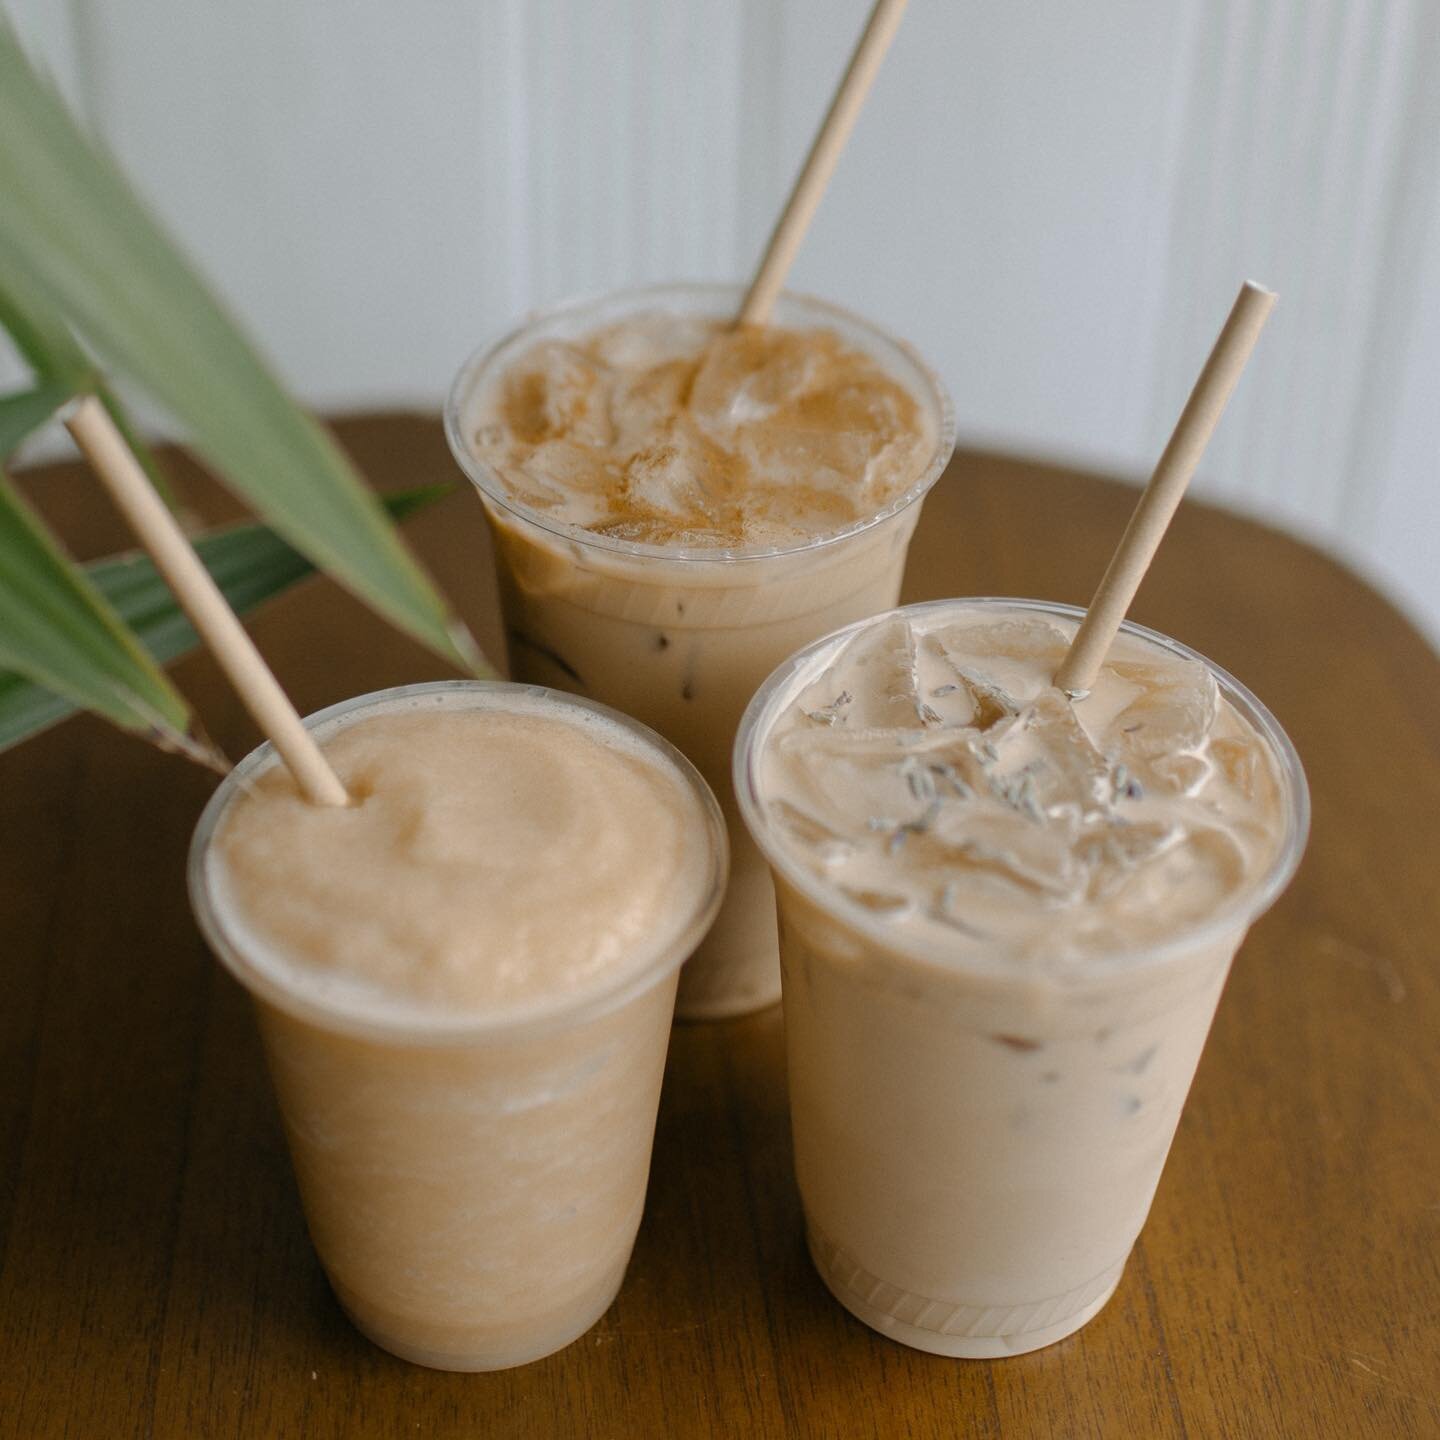 Open 7am-2pm for Memorial Day, just enough time to try some new specials: Horchata Latte (with oat milk), a Tropical Smoothie with Guava, Passionfruit and Coconut Milk - and our Lavender Latte, which is back + here to stay.